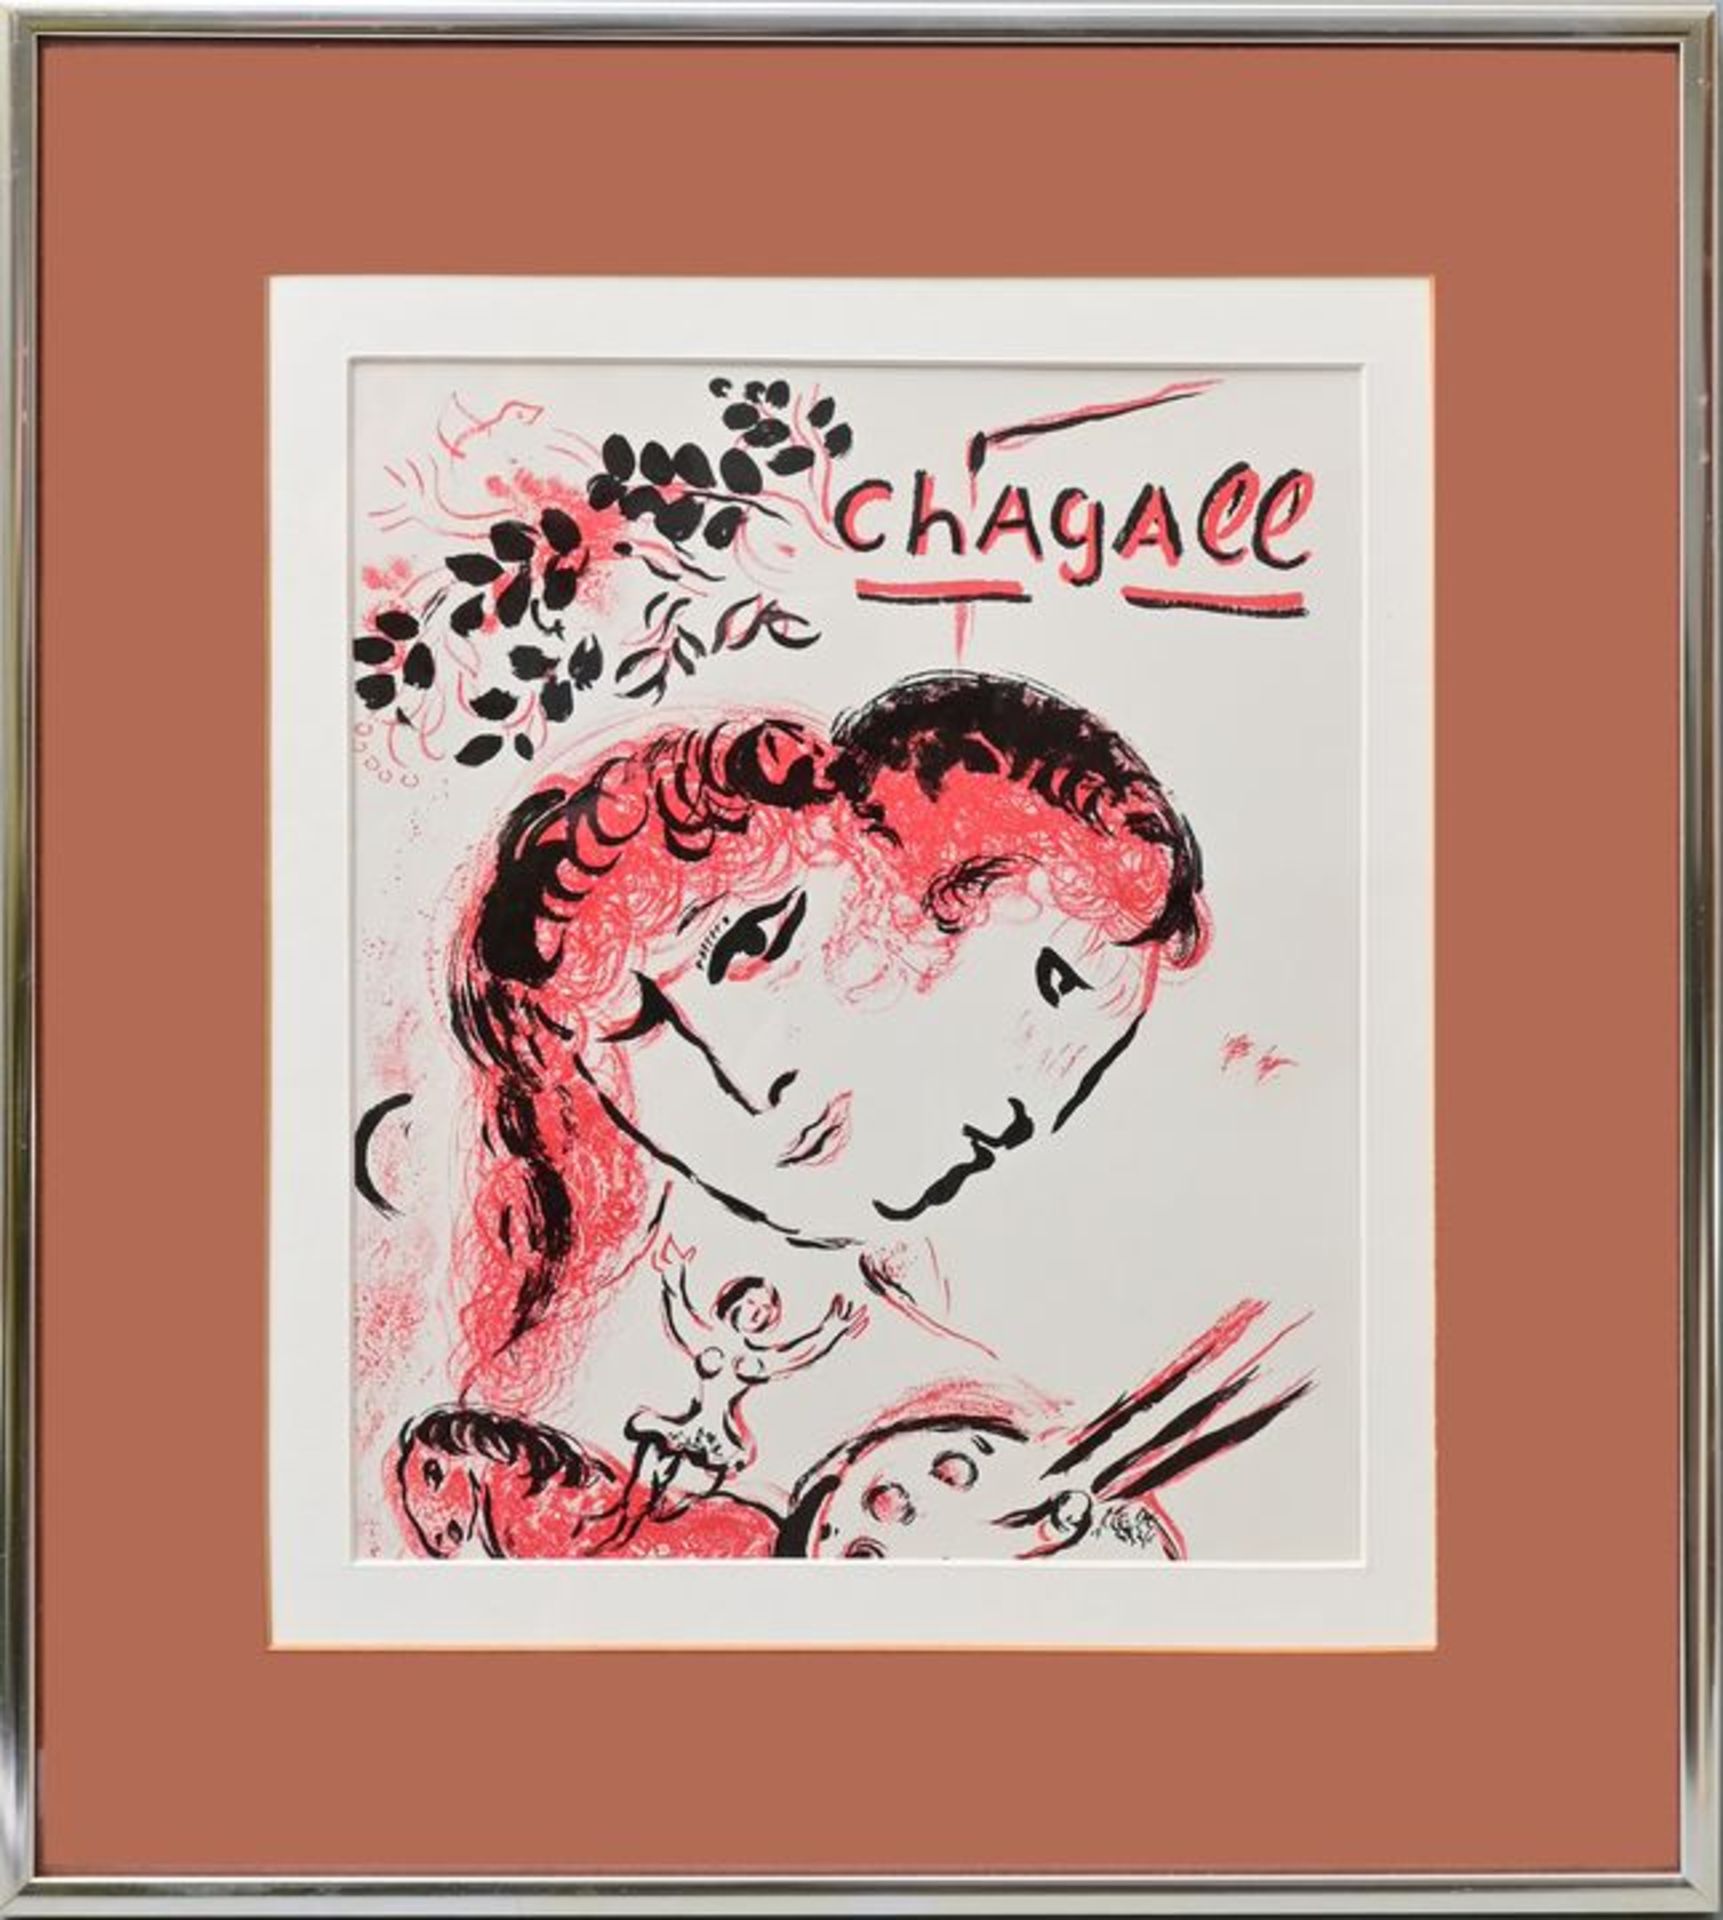 Chagall, Farblitho / Chagall, Colour lithograph - Image 2 of 3